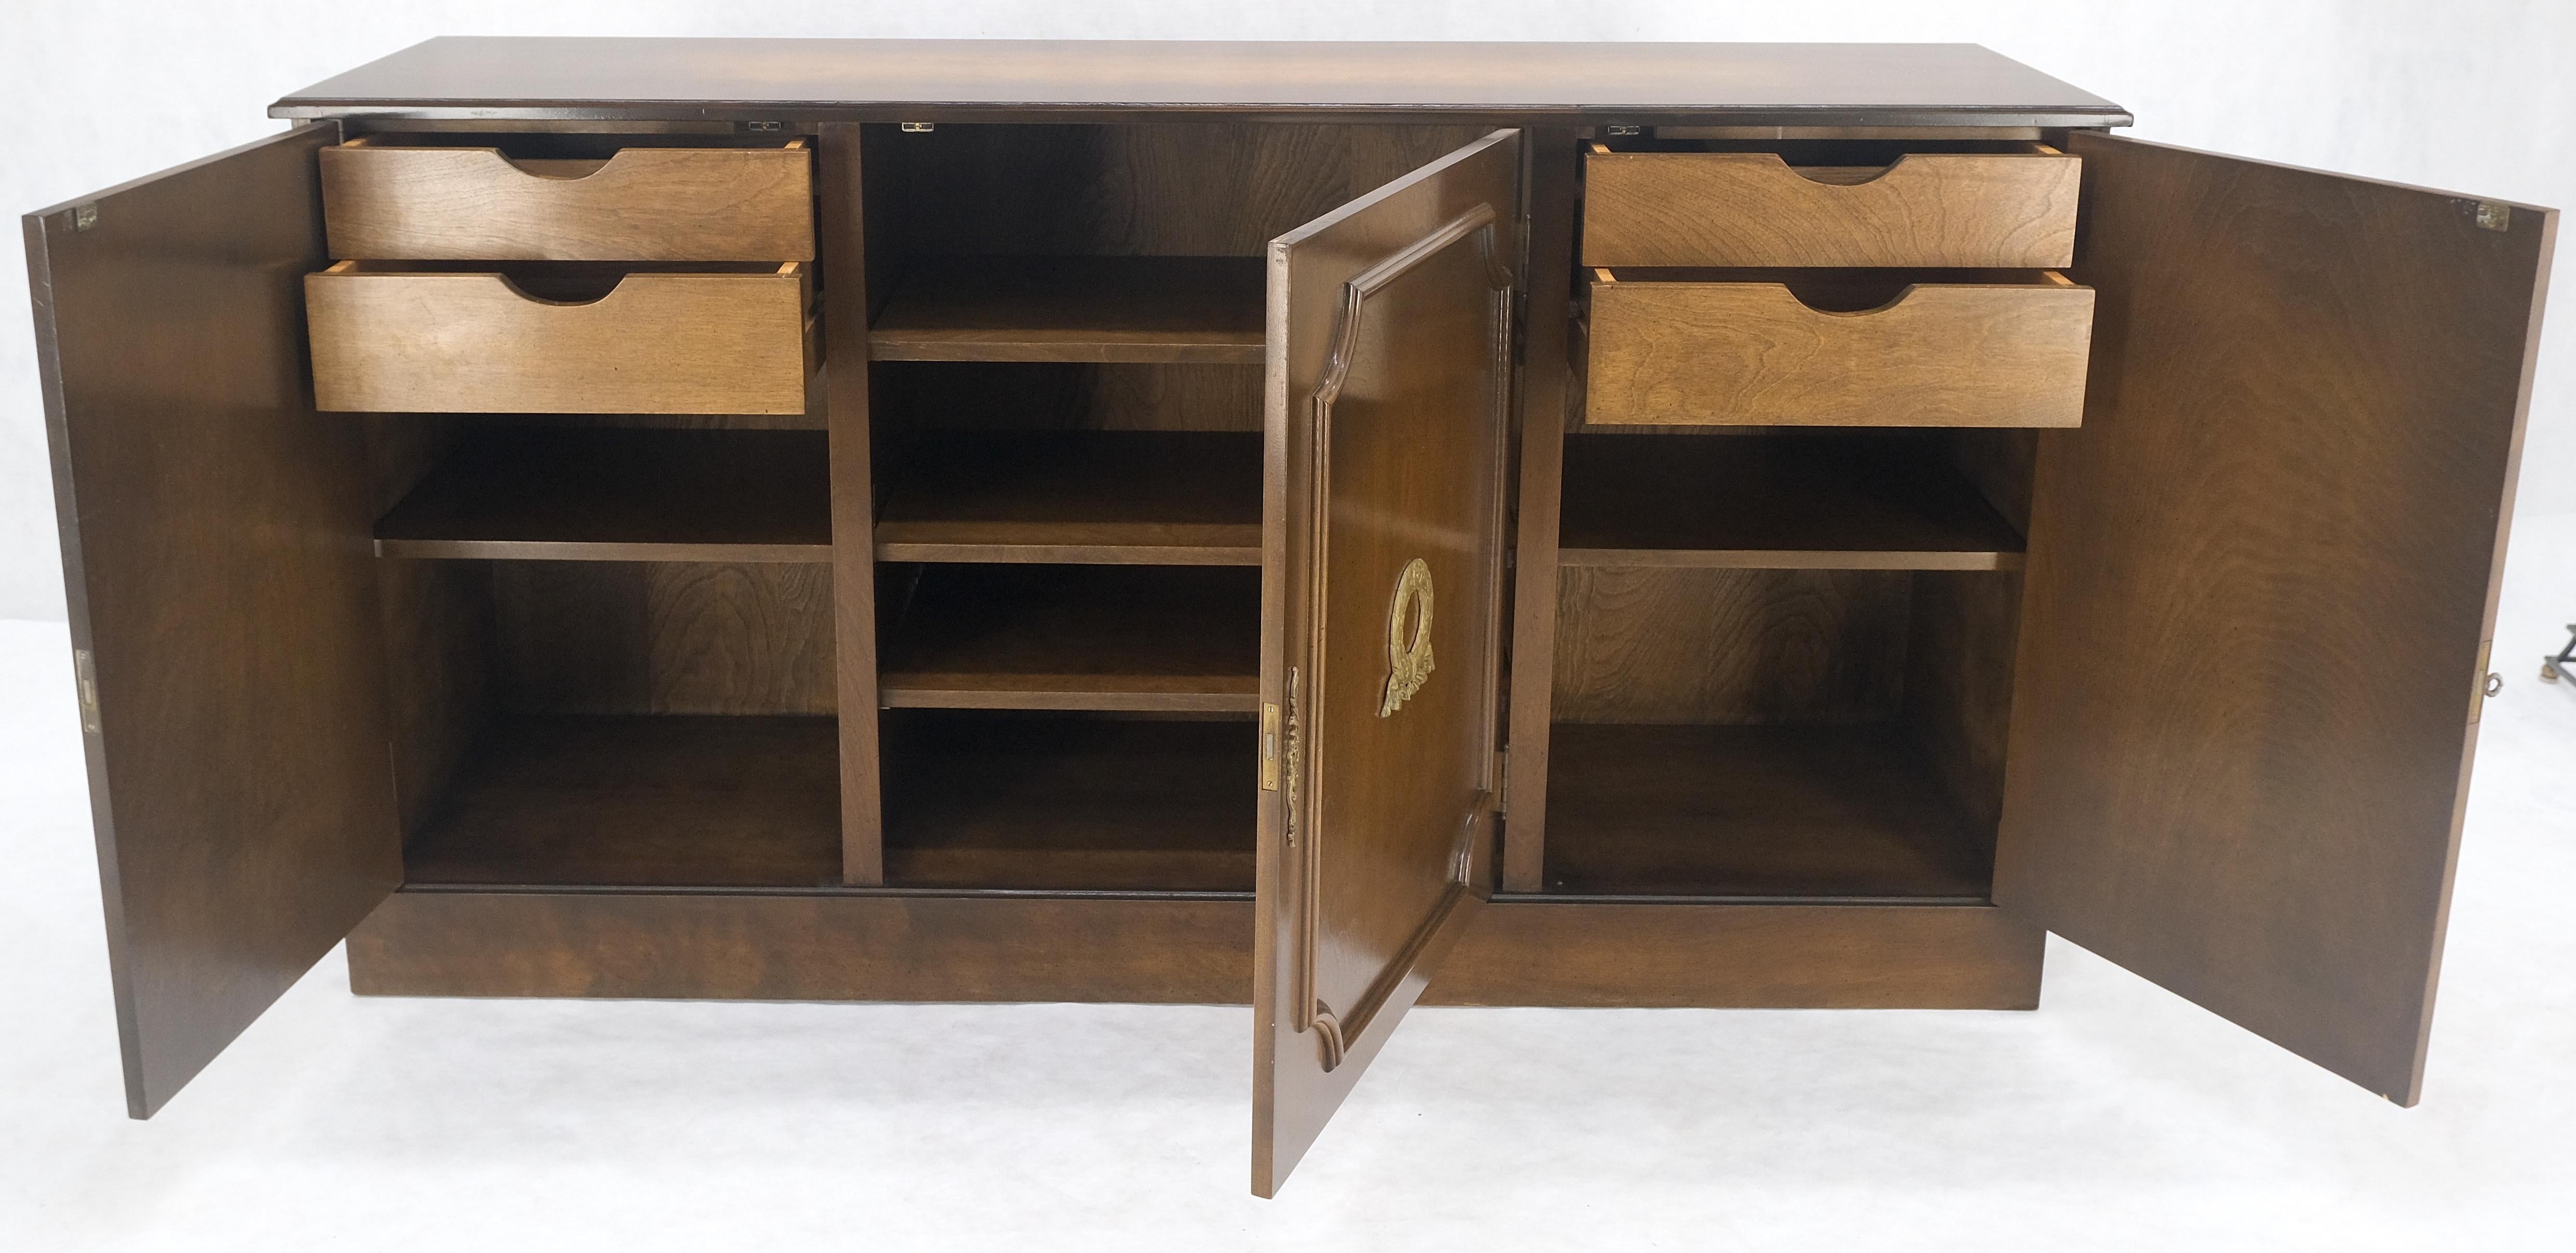 Lacquered Finished BACK Bronze Mounts Three Door 4 Drawers Sideboard Credenza Cabinet MINT For Sale